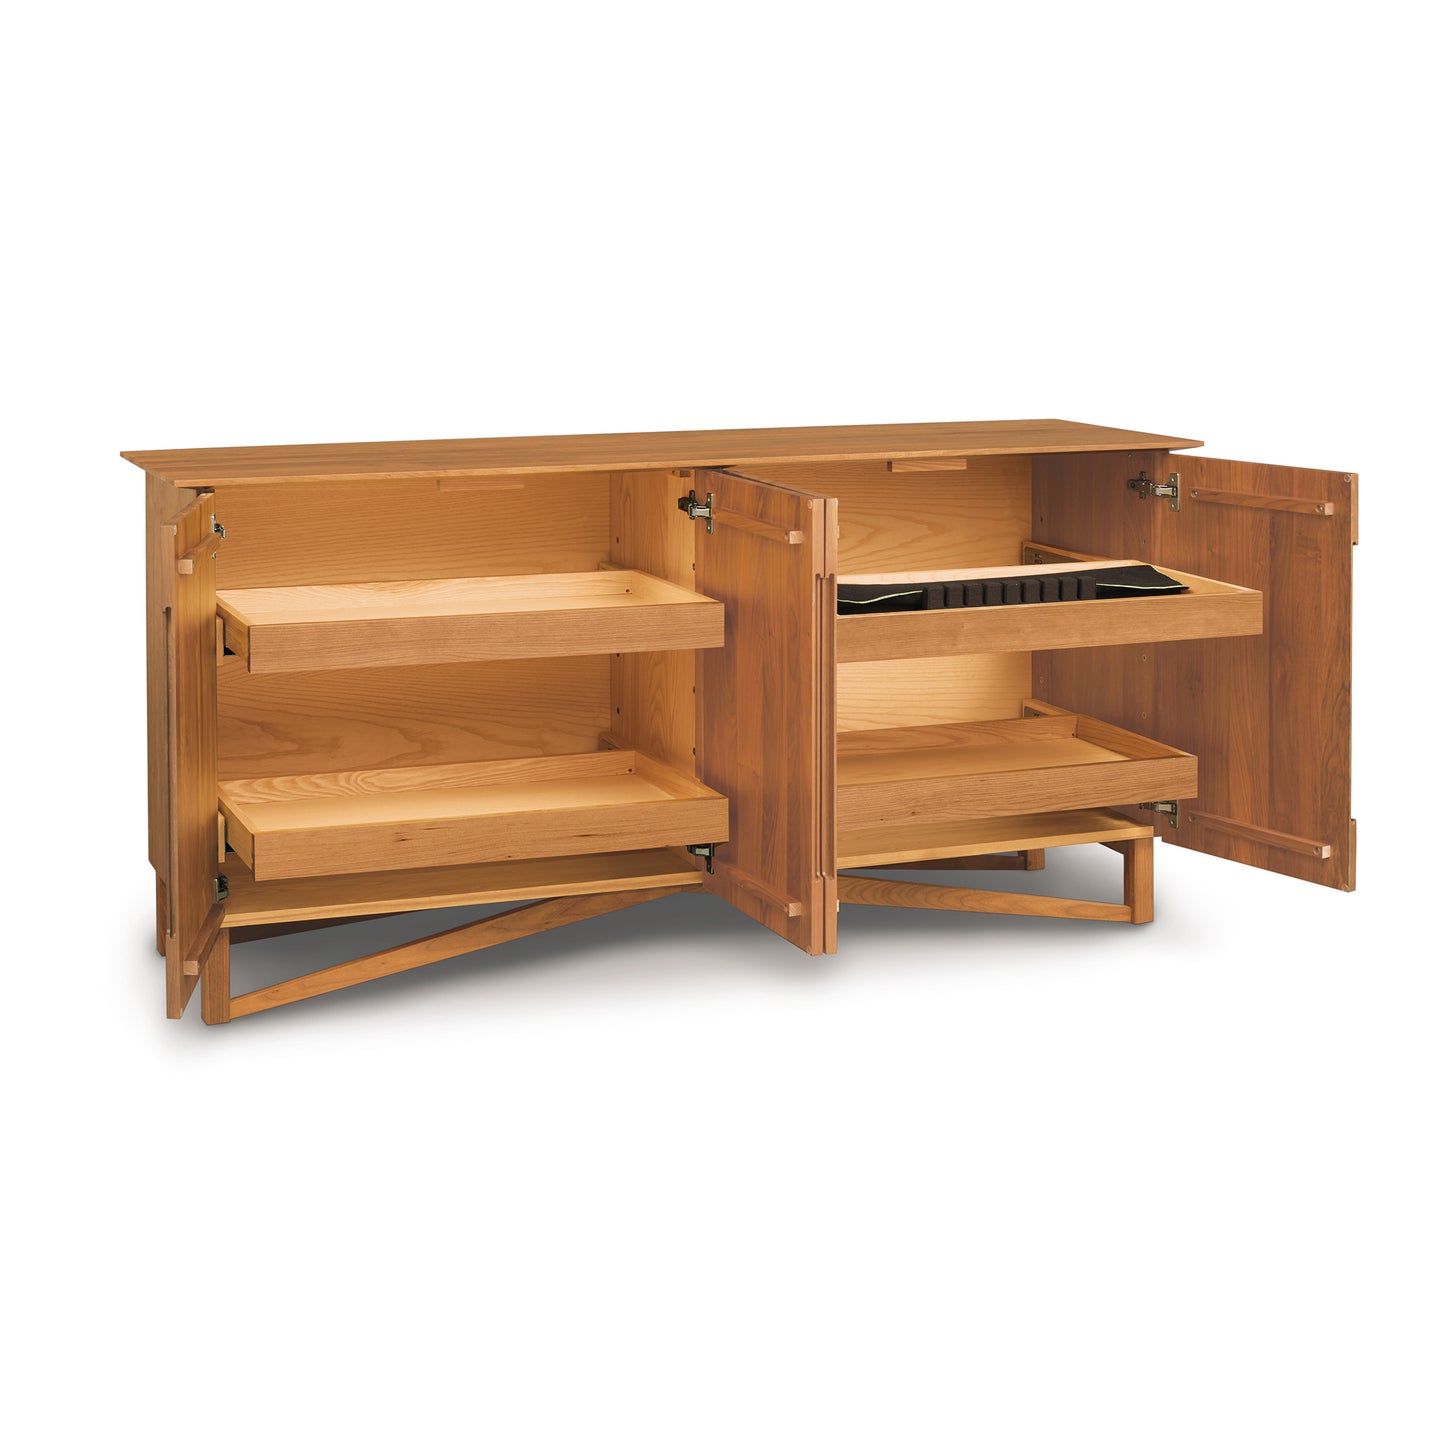 Exeter Buffet solid natural hardwood storage cabinet with doors open, revealing shelves and pull-out drawers from the Copeland Furniture Collection.